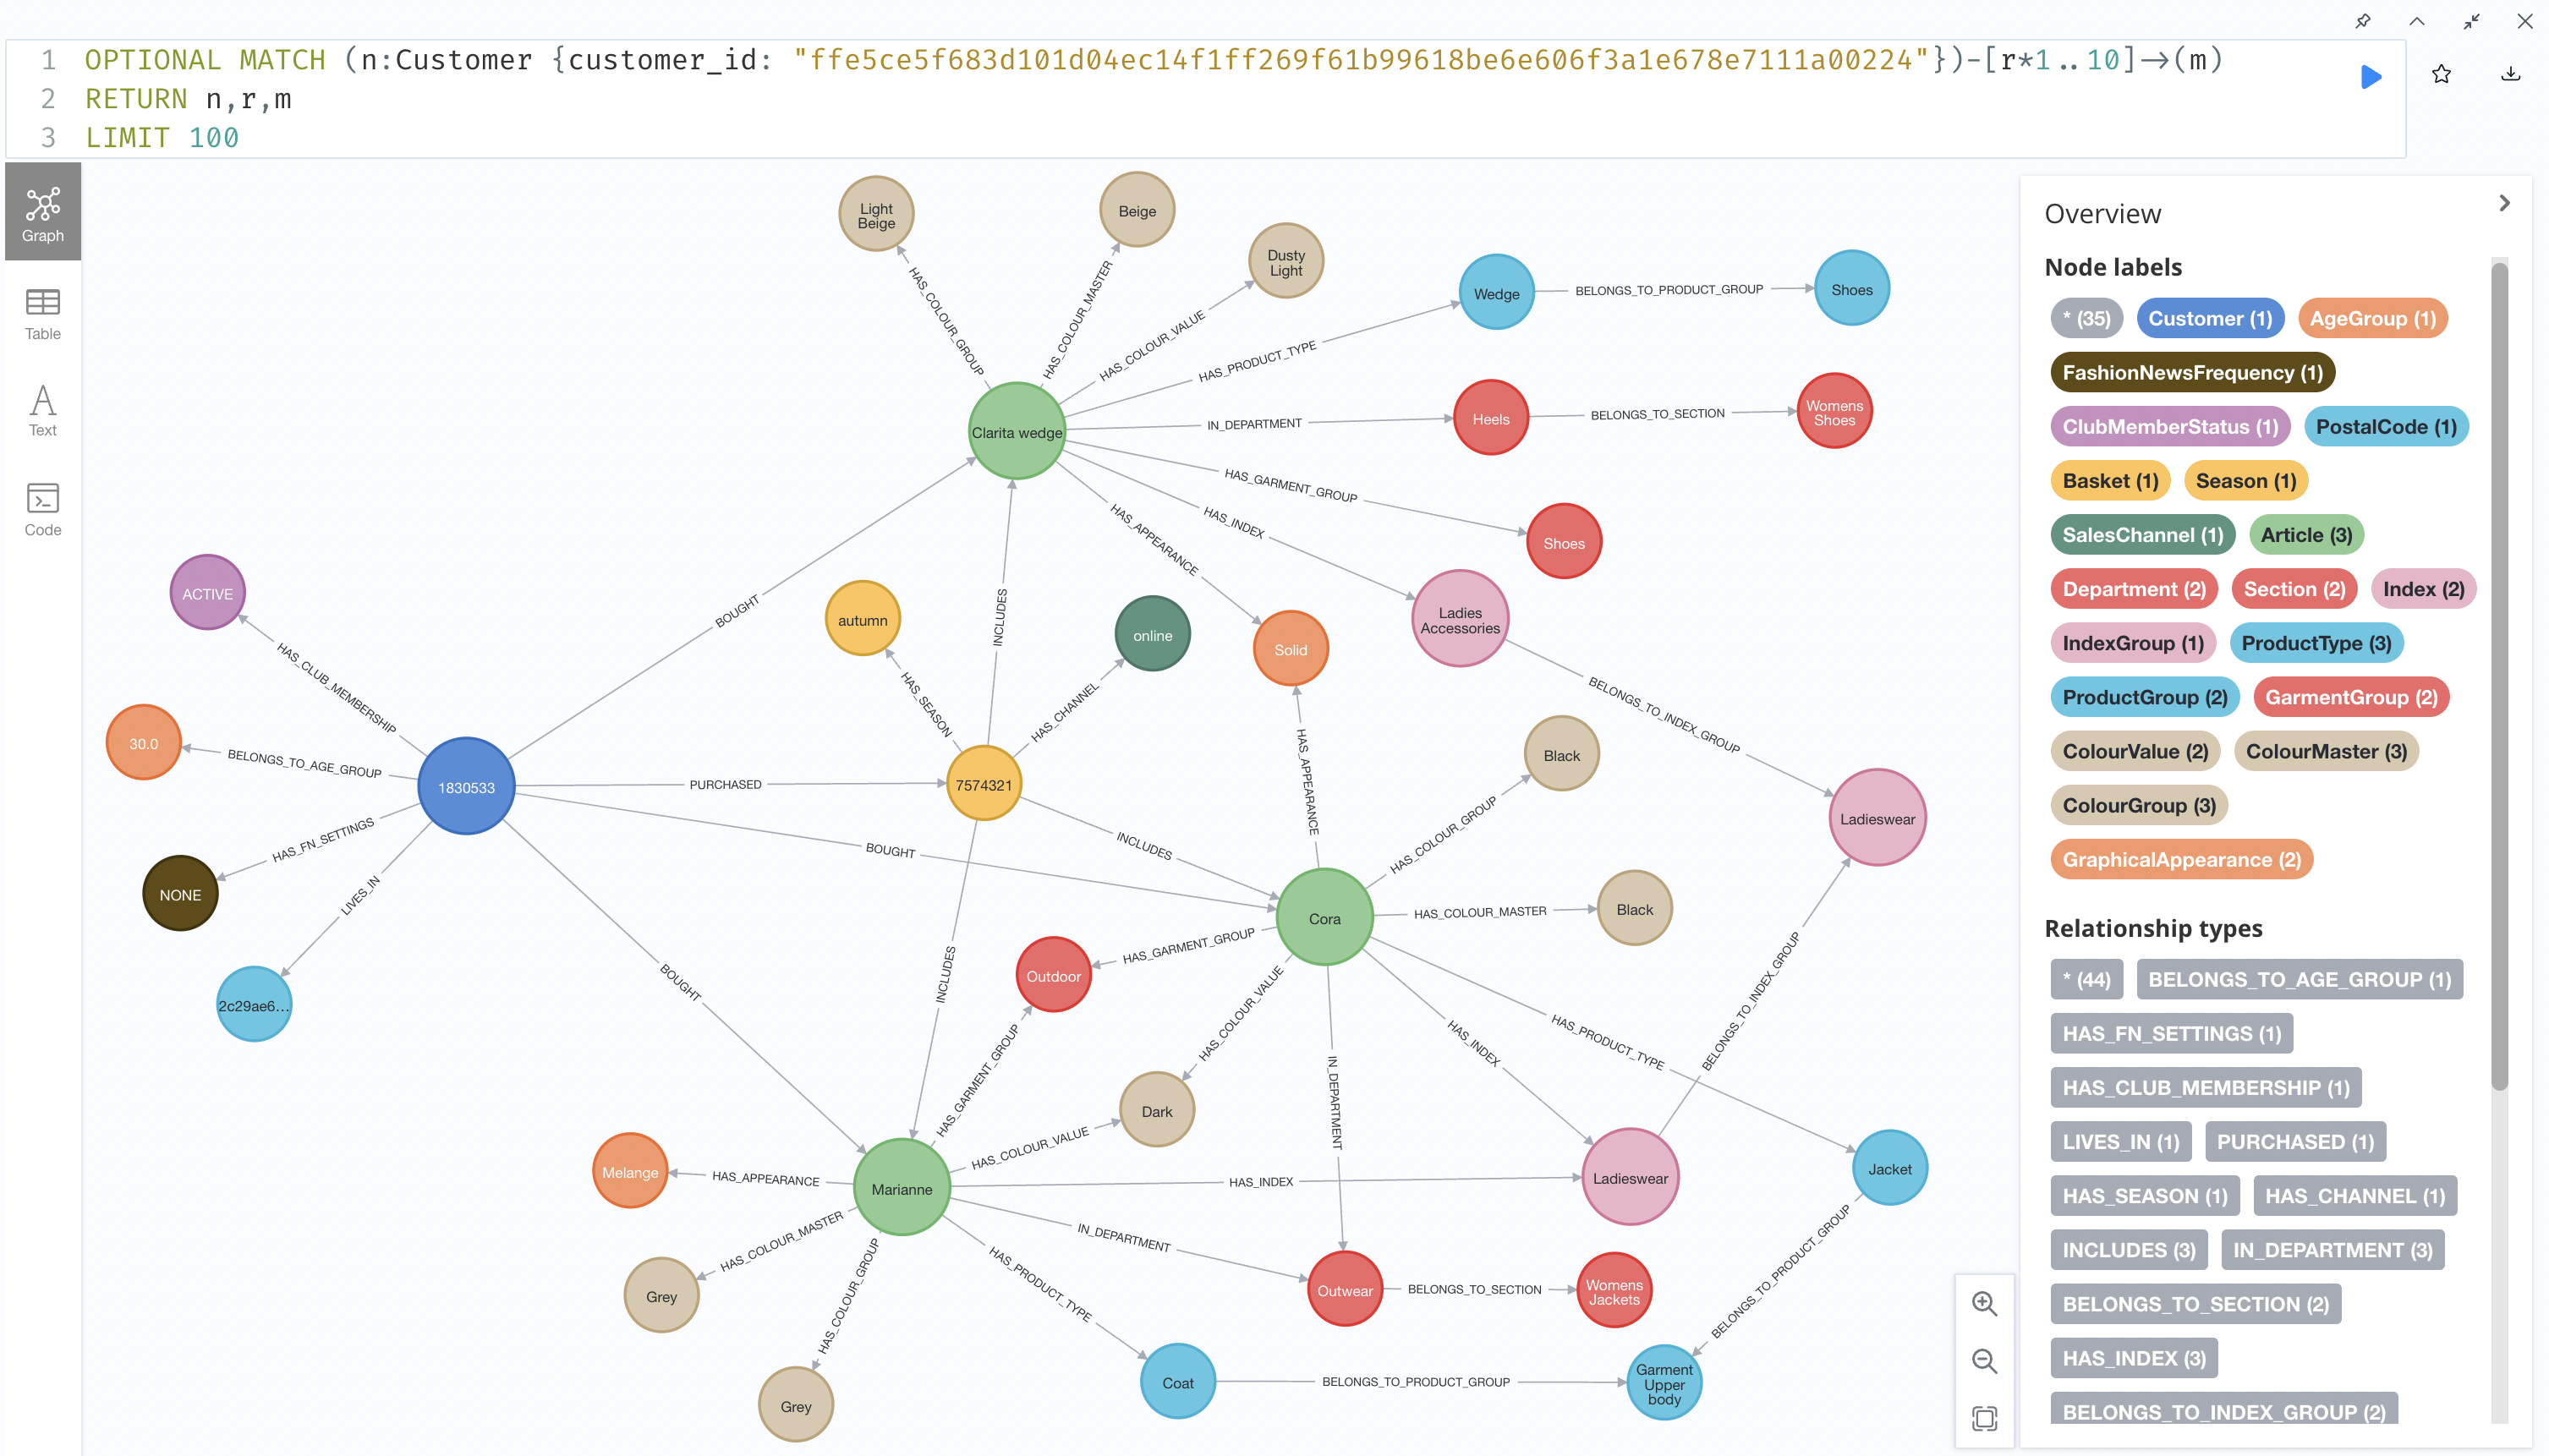 Neo 4j Graph Architecture for Modeling Data Regarding Fashion Recommendation